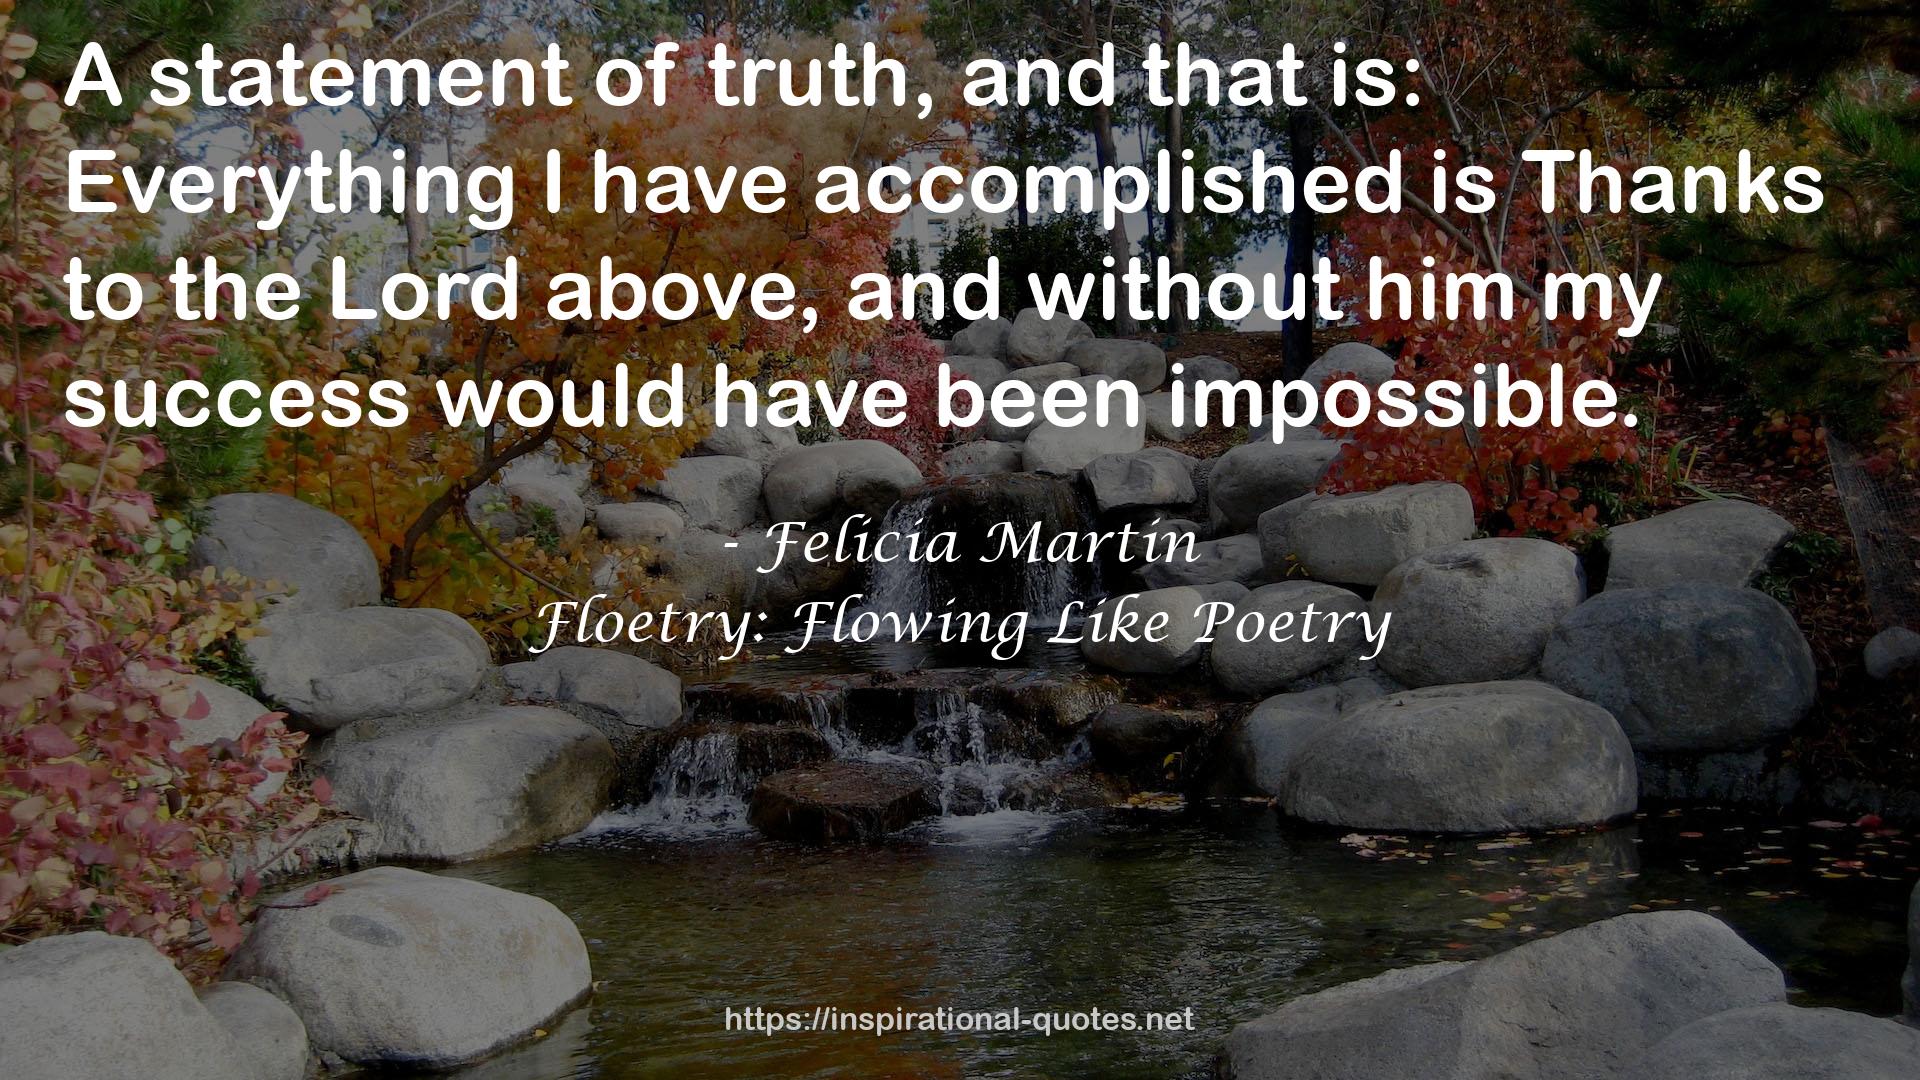 Floetry: Flowing Like Poetry QUOTES